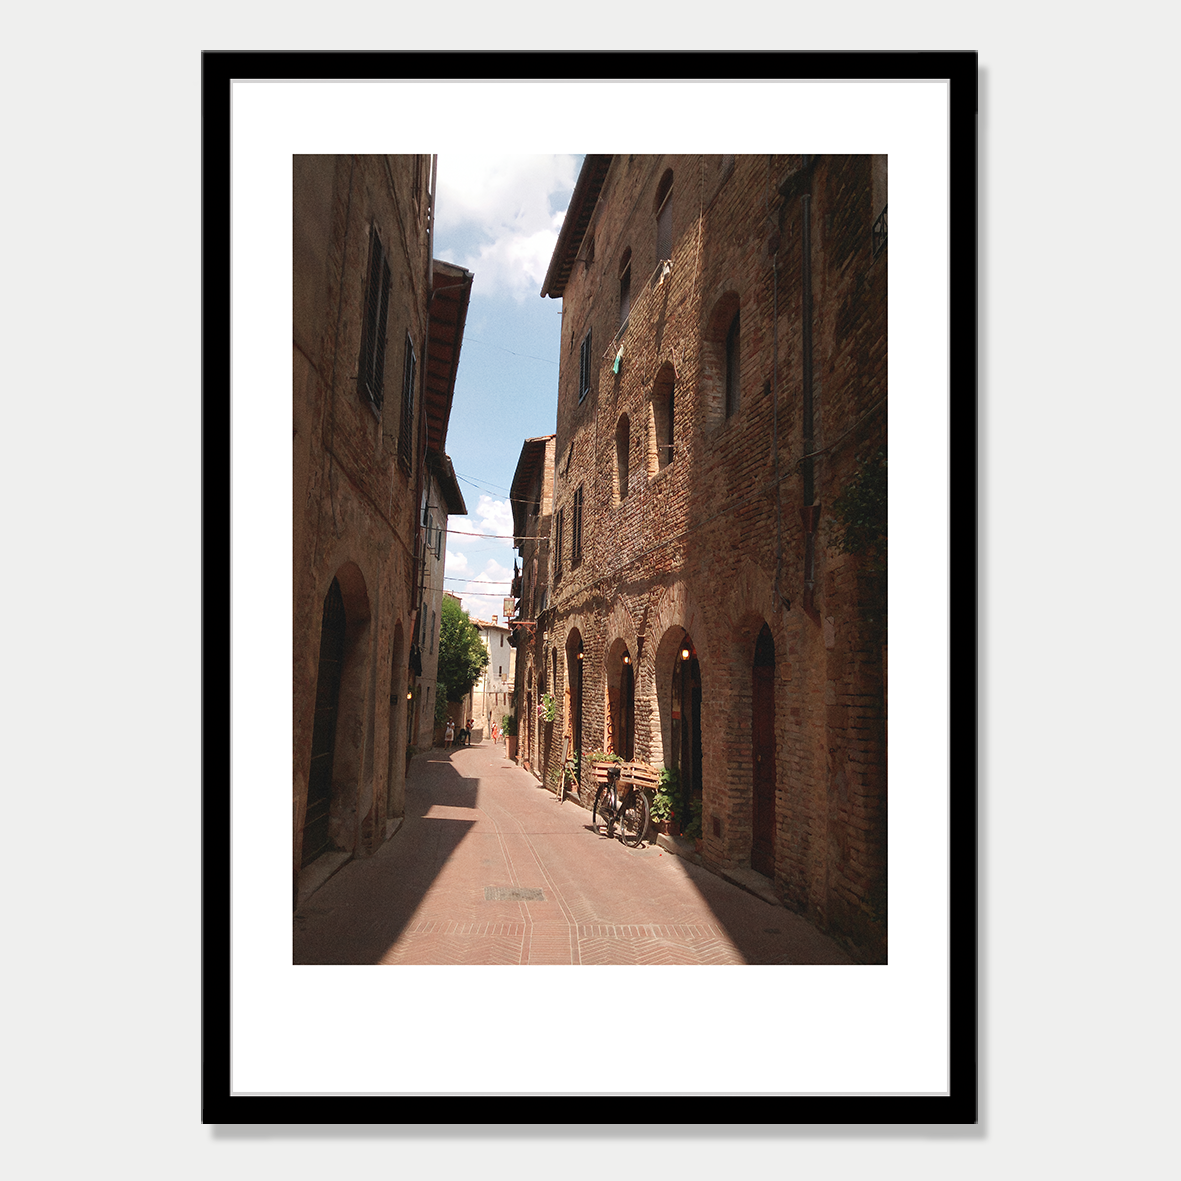 A Bicycle and Still Life in a Backstreet of San Gimignano, Naples, Italy, Photographic Art Print in a Skinny Black Frame